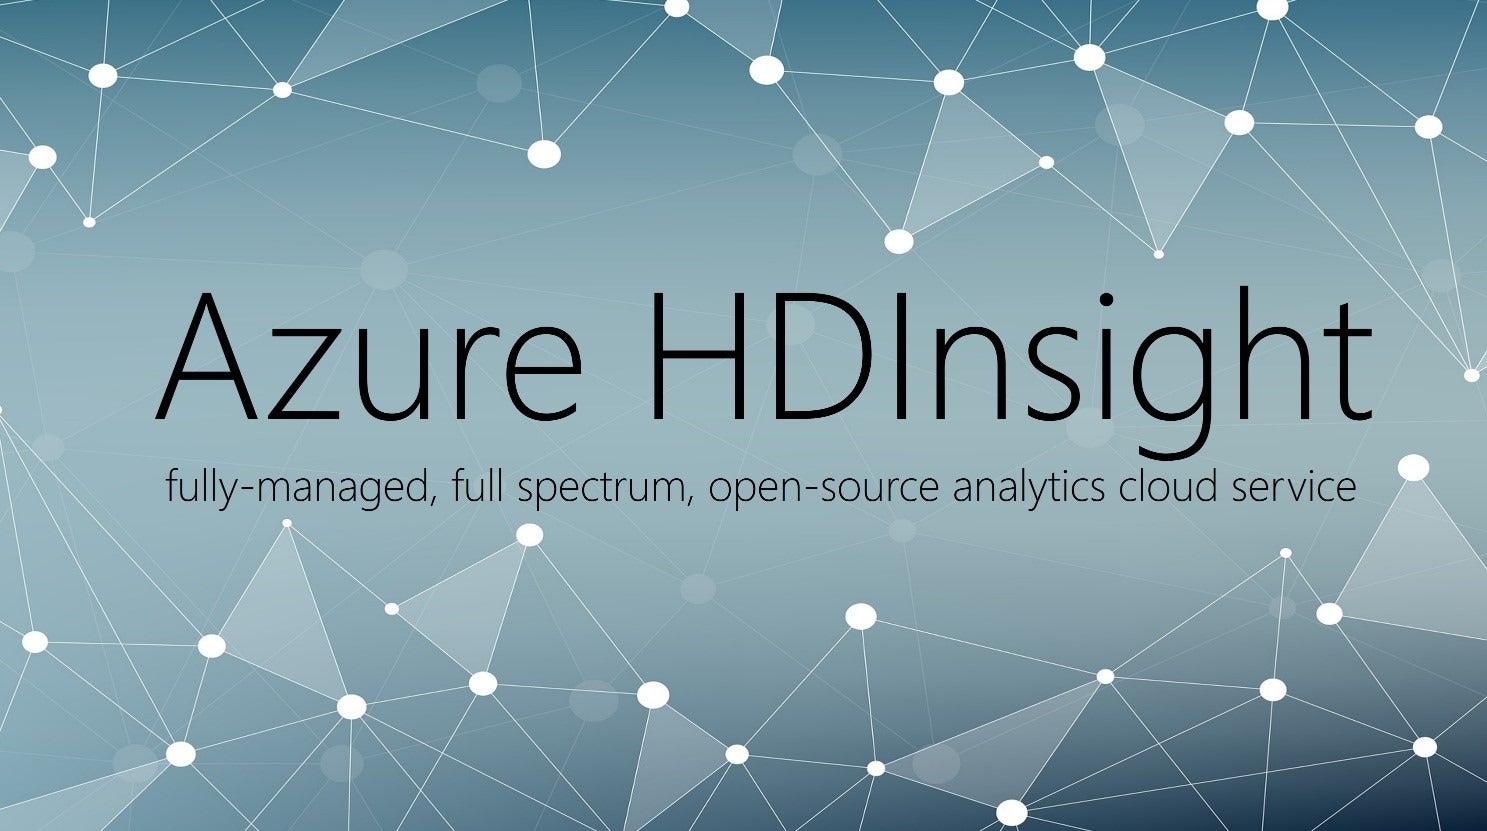 Microsoft cuts Azure HDInsight prices, gives developers new big data tools